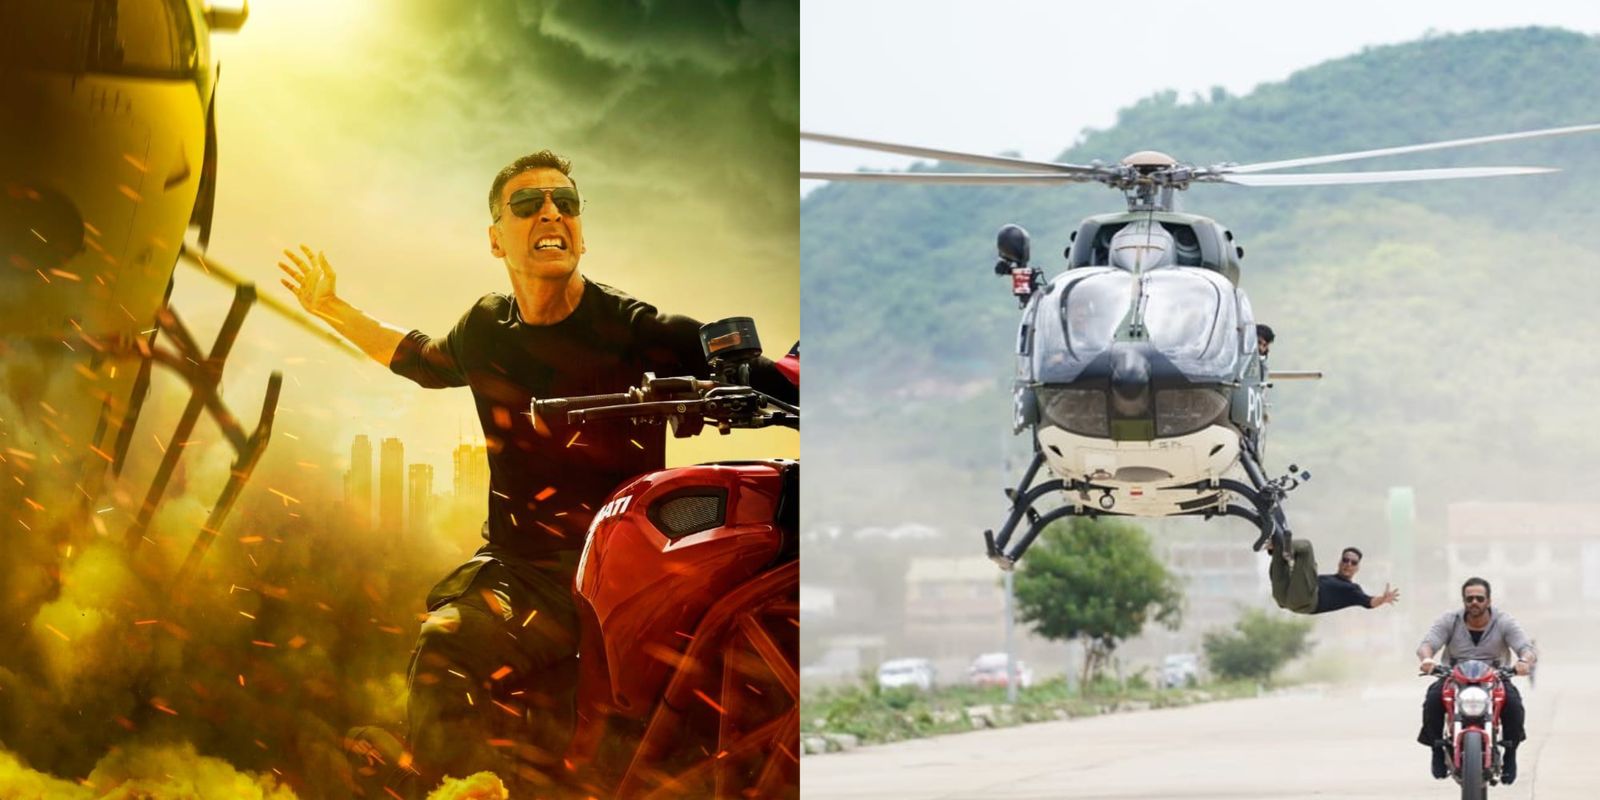 Sooryavanshi: Ahead Of Trailer Launch Akshay Kumar Reveals He Did His First Chopper Stunt At 28, Happy To Do It Again At 52